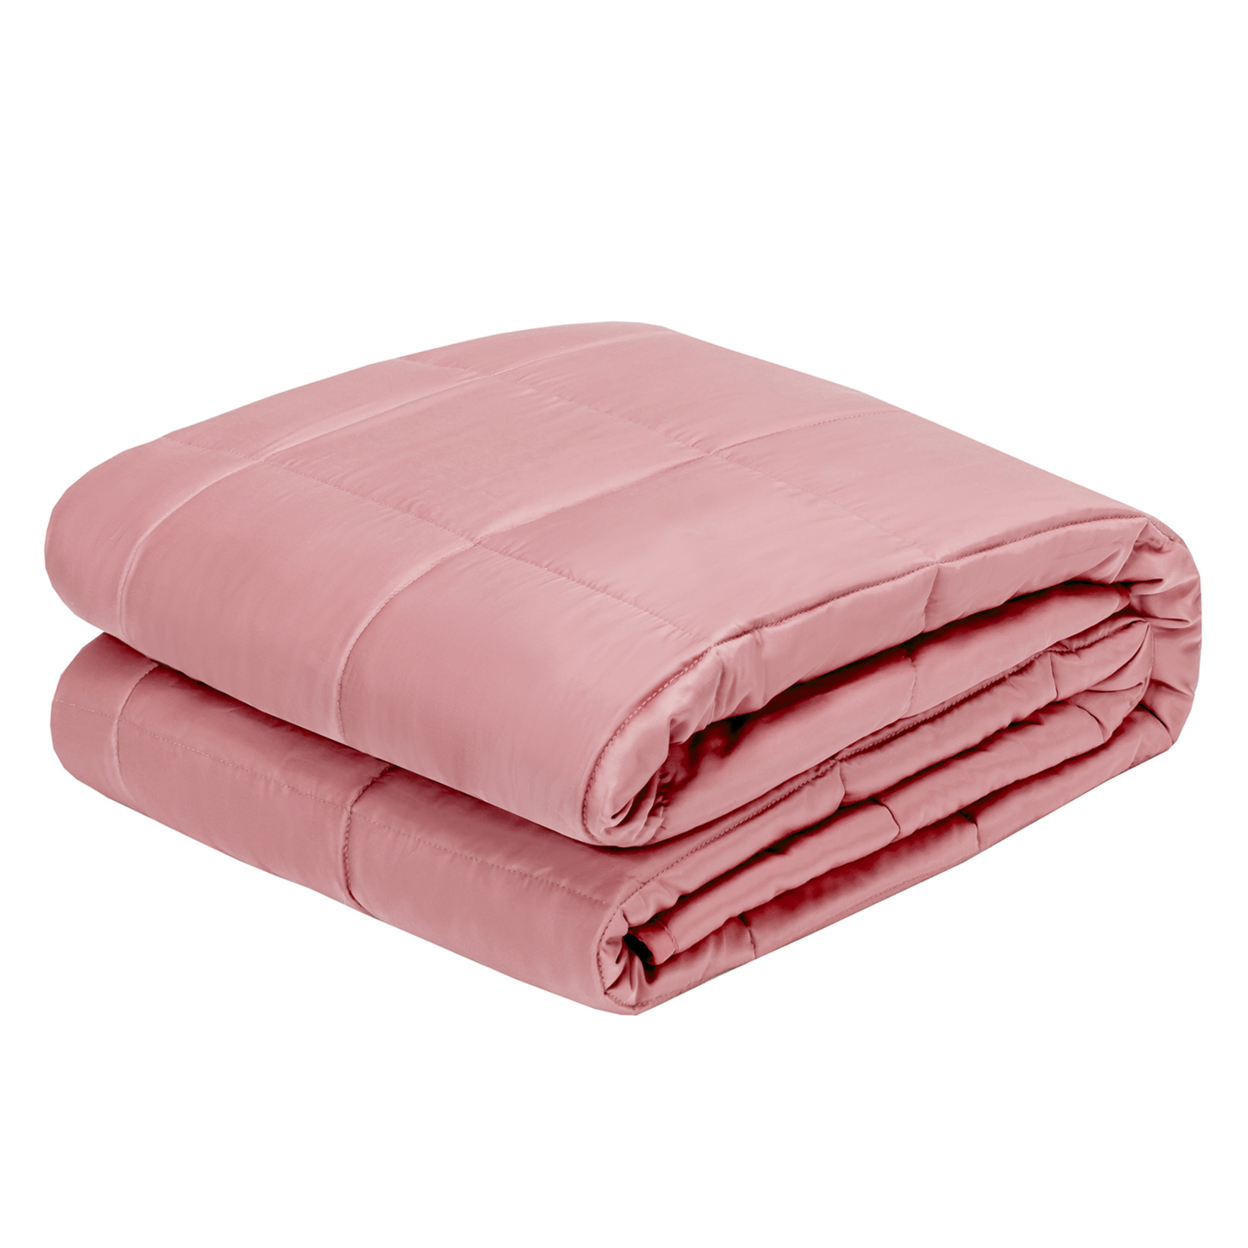 15 Lbs 48'' X 72'' Weighted Blanket W/ Bamboo Fabric Cover Blue/Green/Pink - Pink